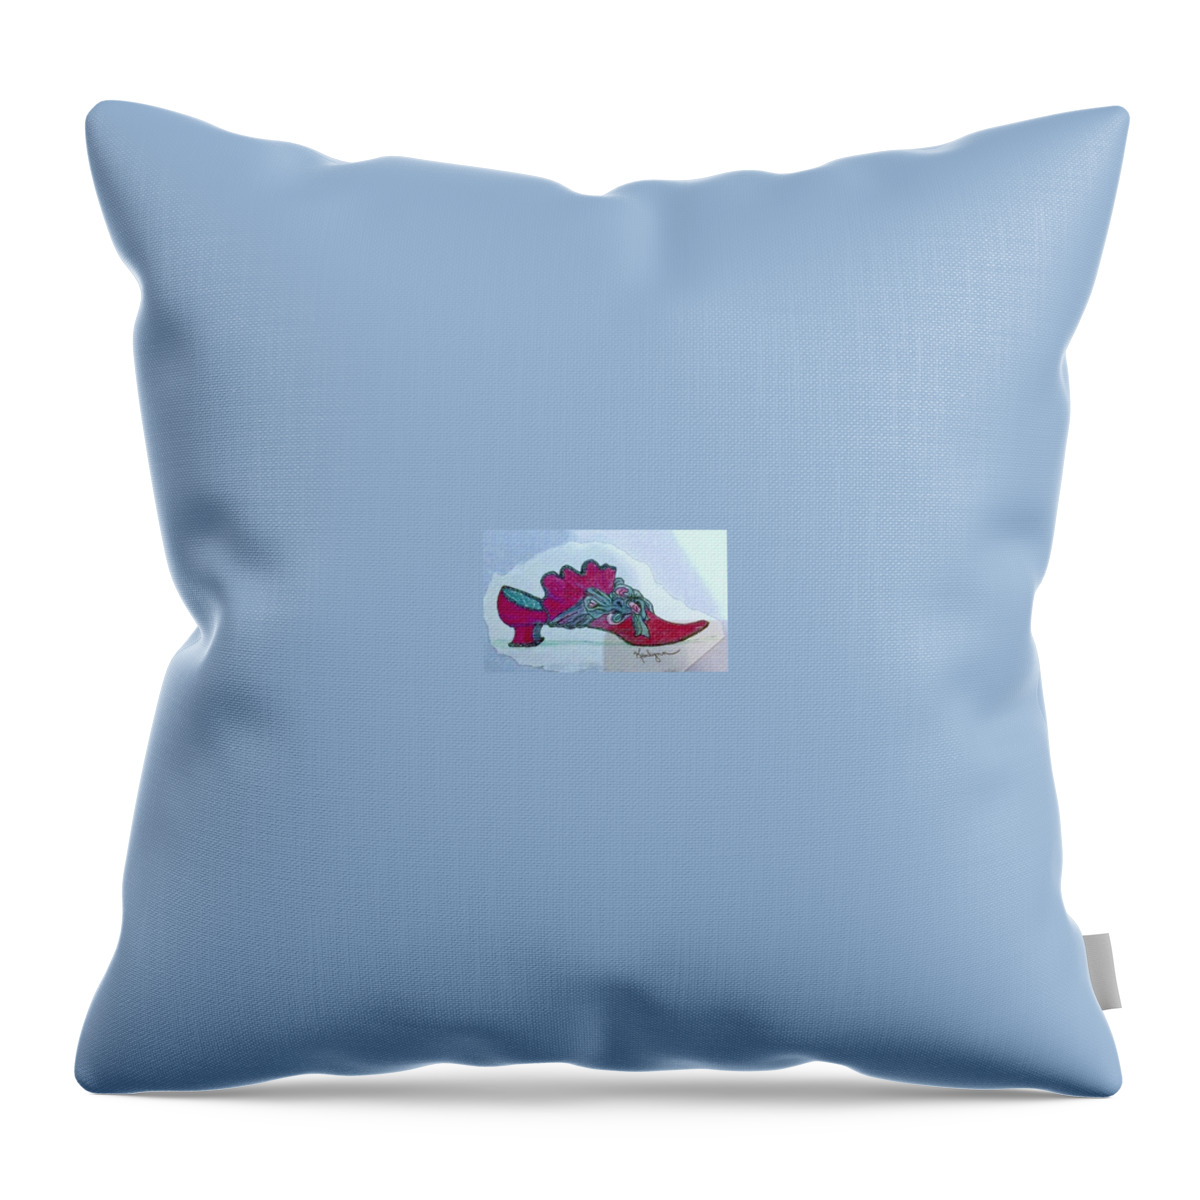 Royal Throw Pillow featuring the painting In The Royal Court by Kenlynn Schroeder